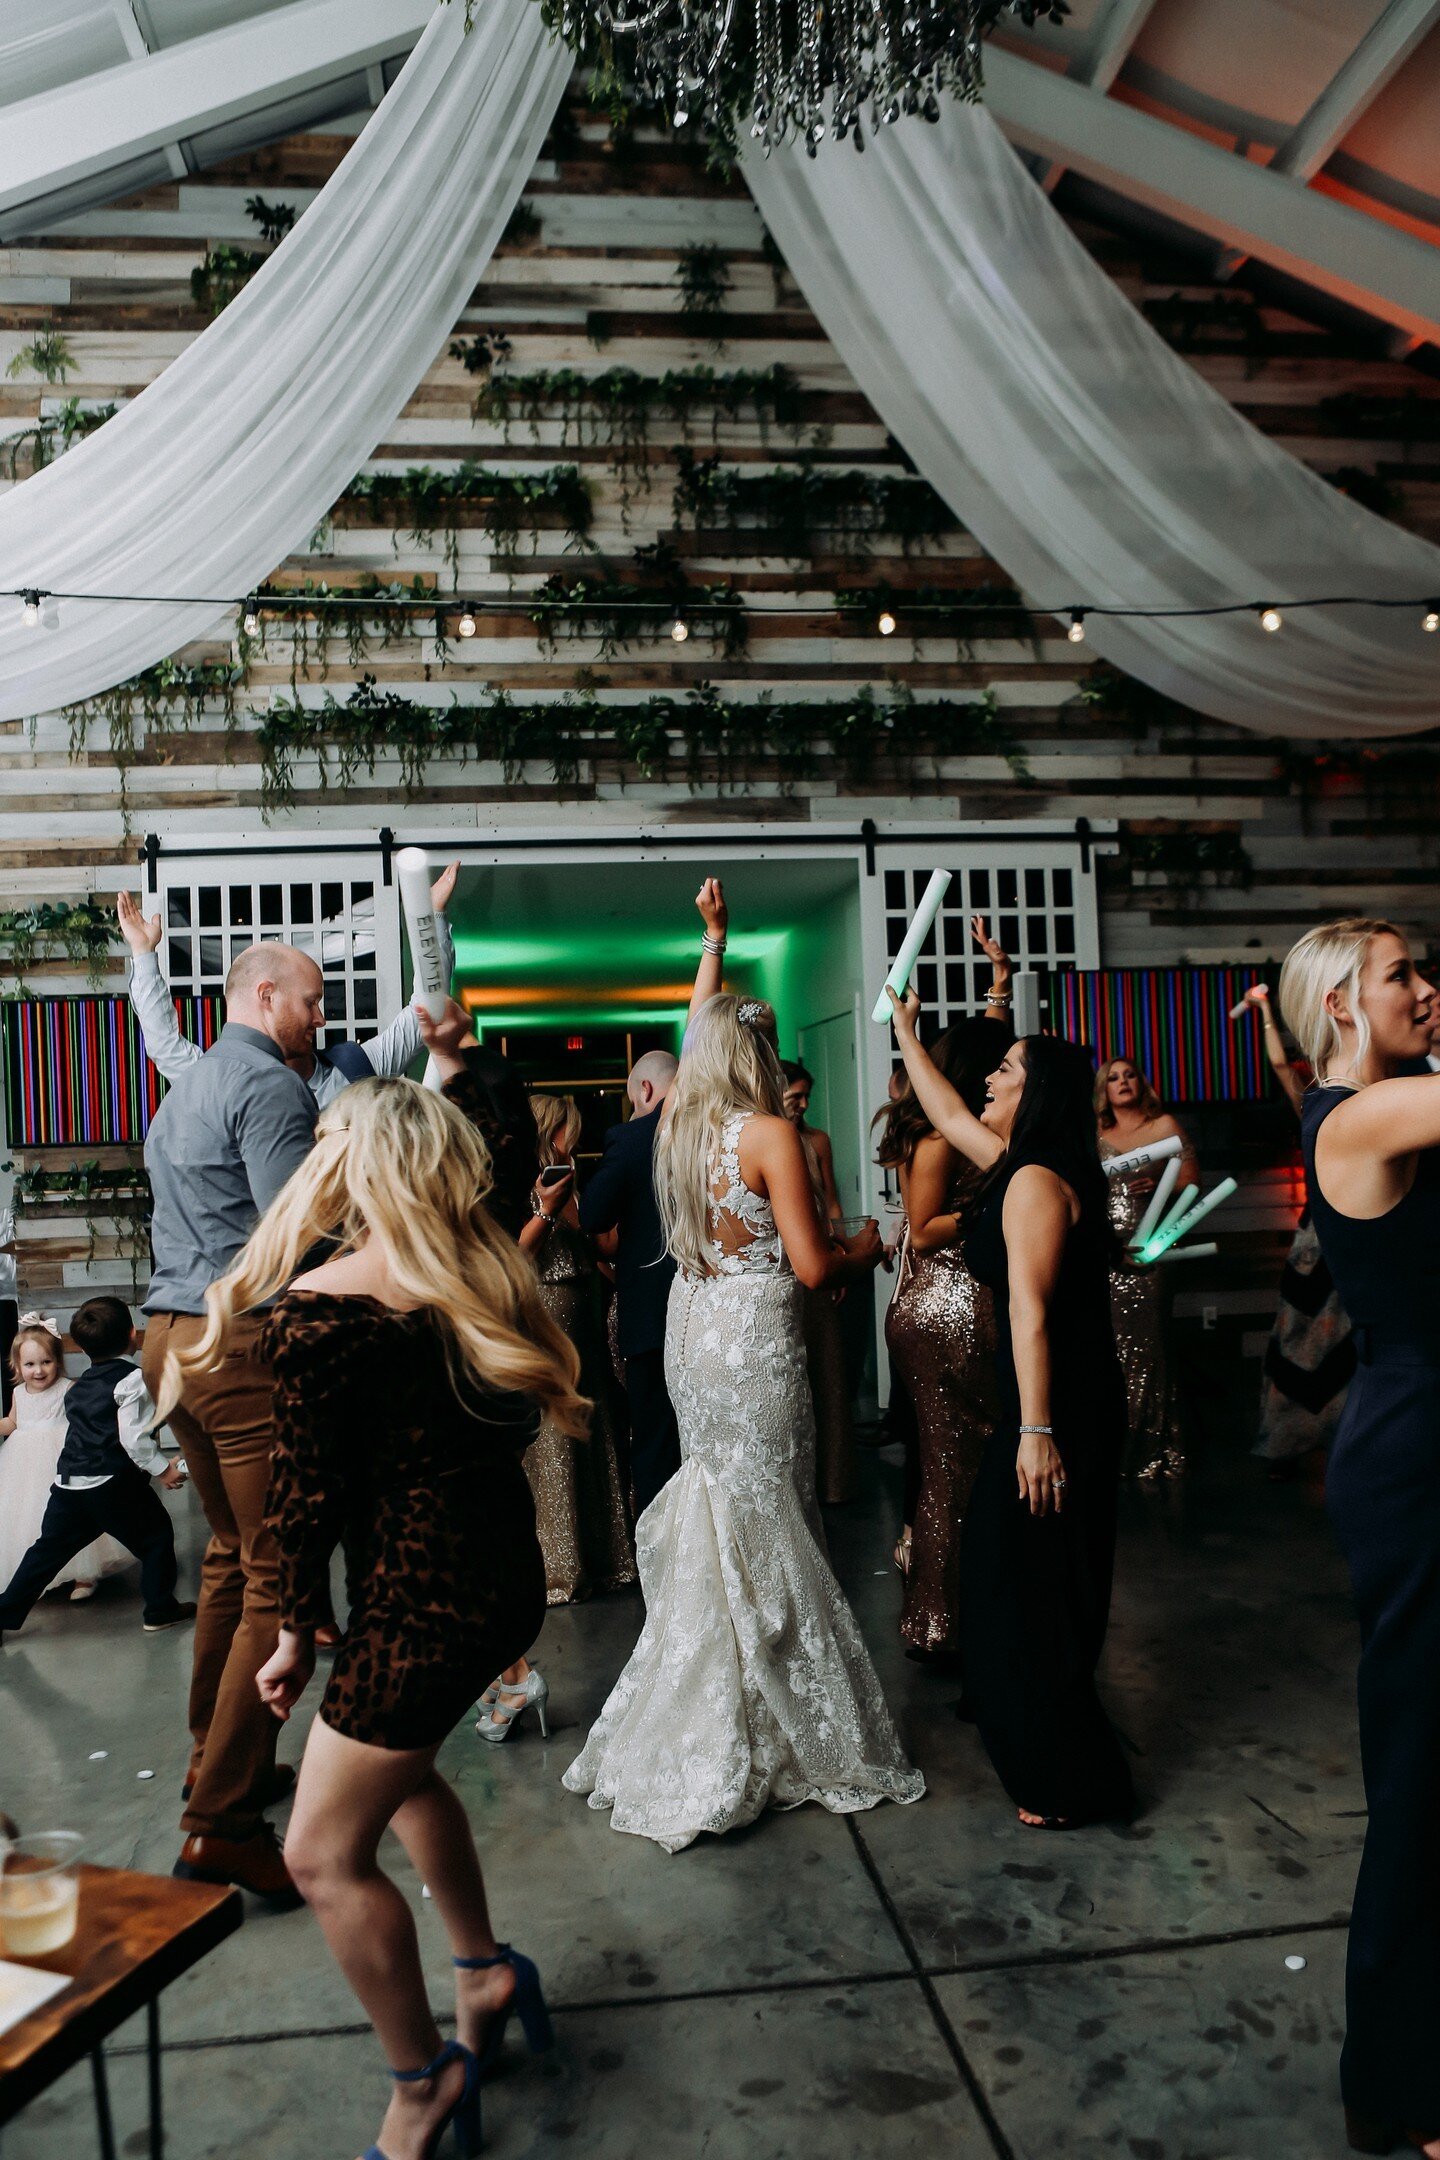 On your big day, you deserve to let loose and enjoy yourself! We'll take care of the music and entertainment... you've got partying to do!
📸 @LaurenGreenbergPhotography